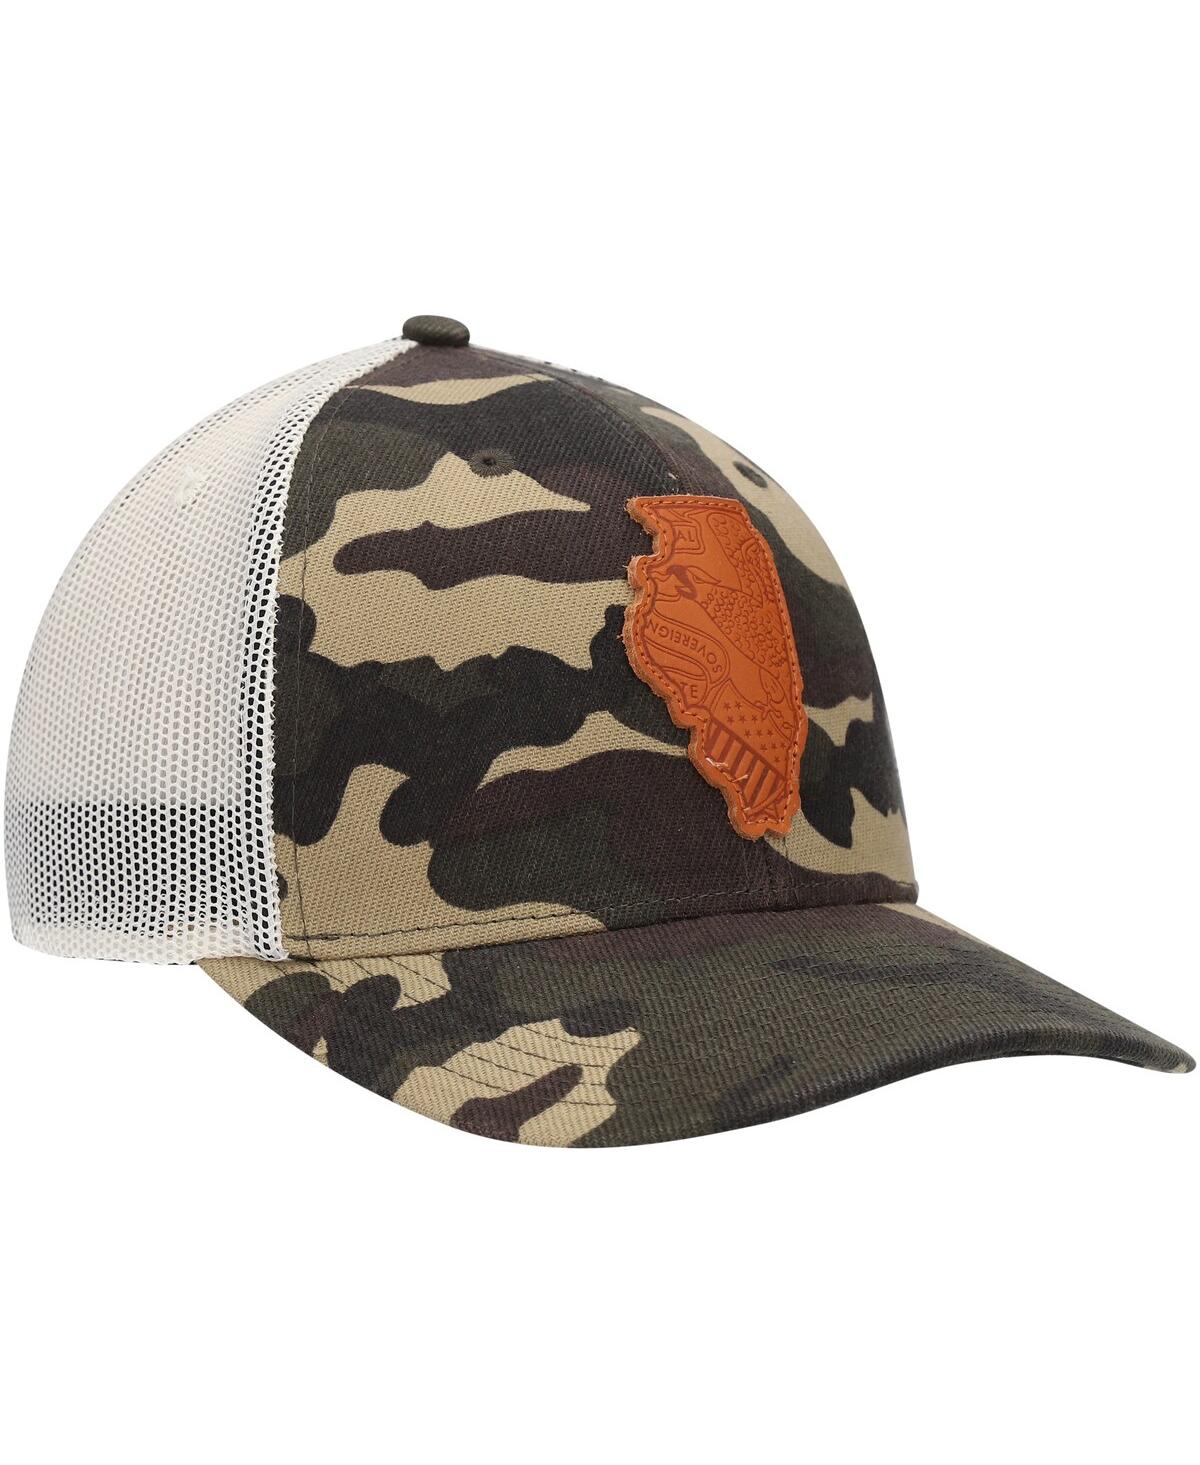 Shop Local Crowns Men's  Camo Illinois Icon Woodland State Patch Trucker Snapback Hat